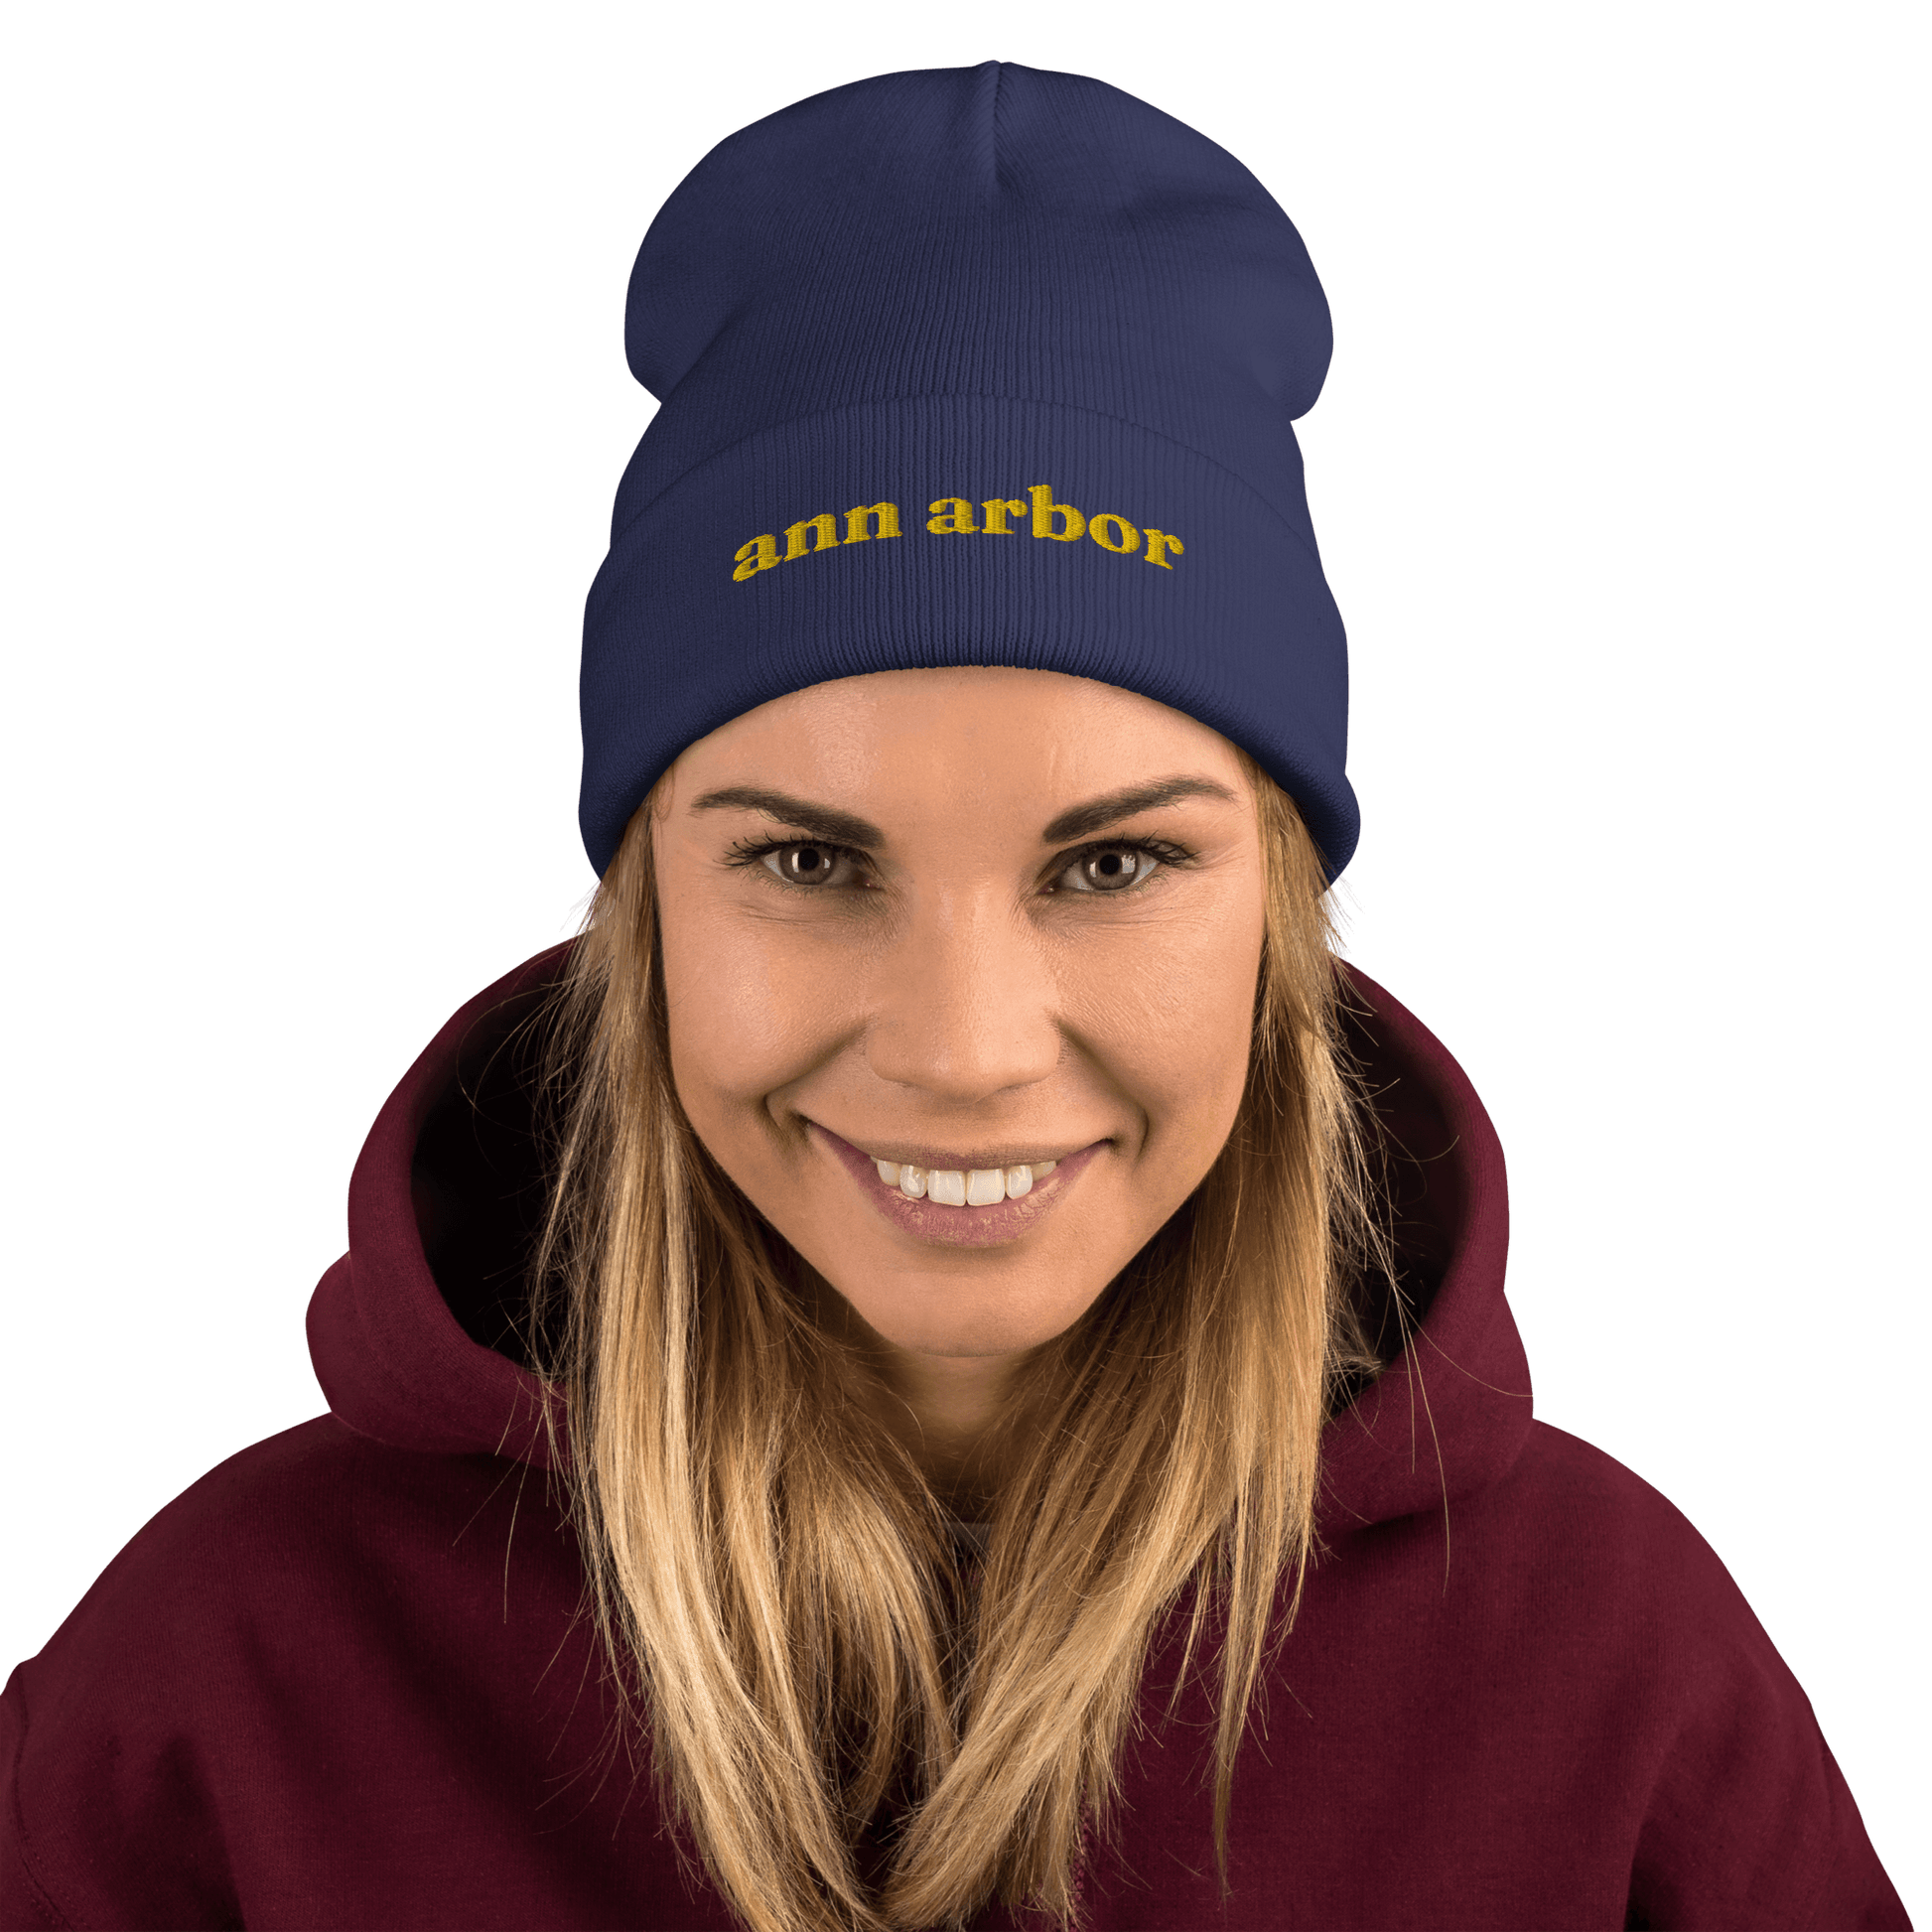 'Ann Arbor' Winter Beanie (Old-Style Serif Font) | Gold Embroidery - Circumspice Michigan